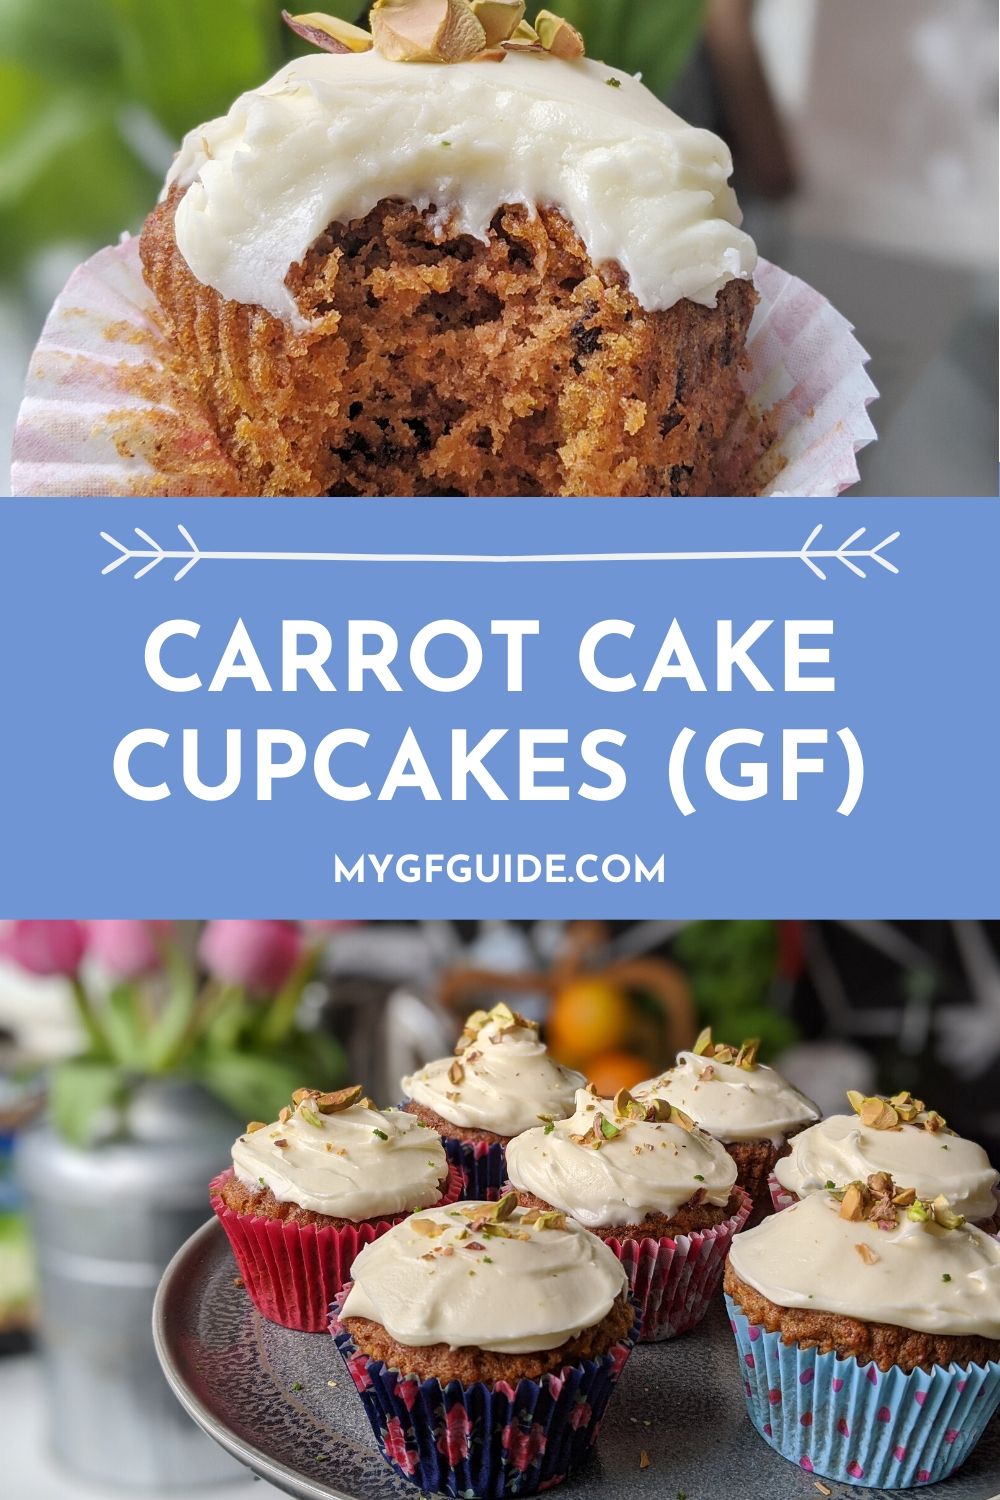 Carrot Cake Cupcakes with Cream Cheese Frosting - Gluten Free Recipe